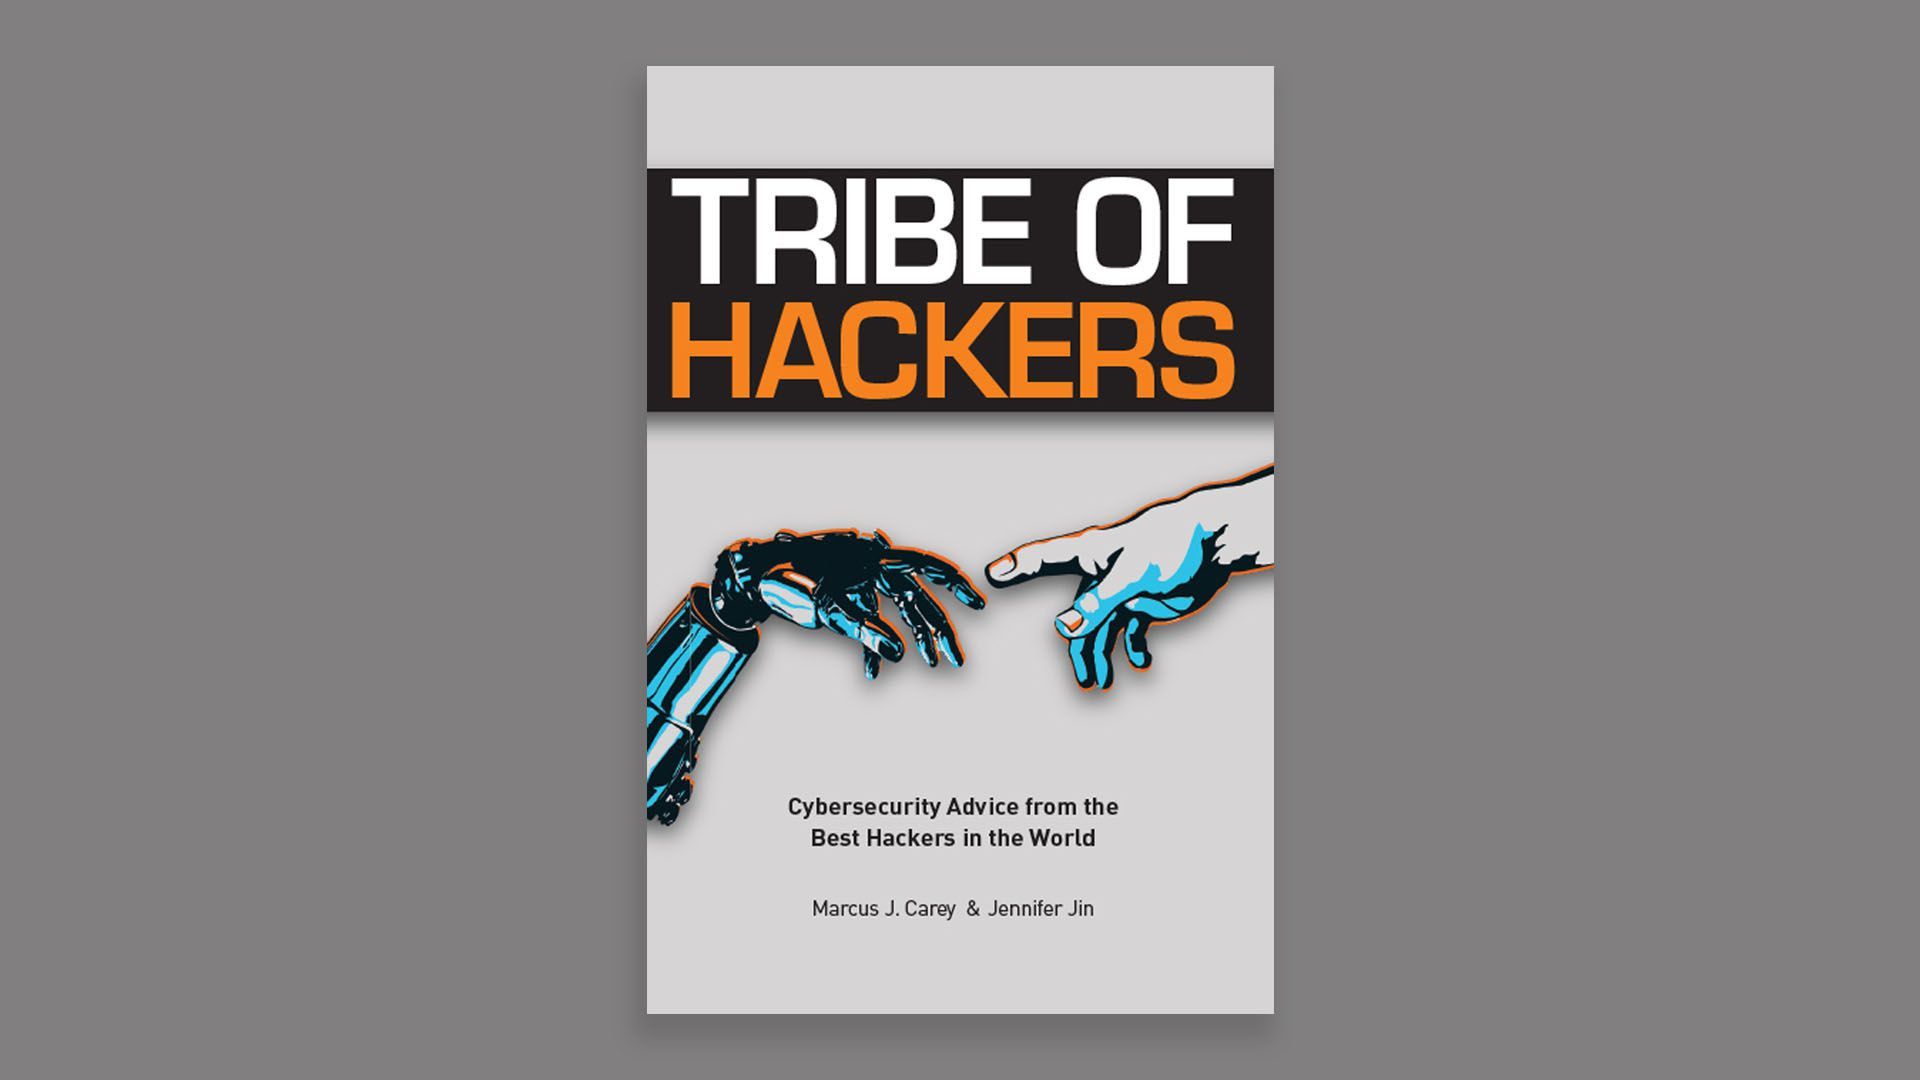 book cover of Tribe of Hackers with human hand reaching out to robot hand, Michelangelo-style